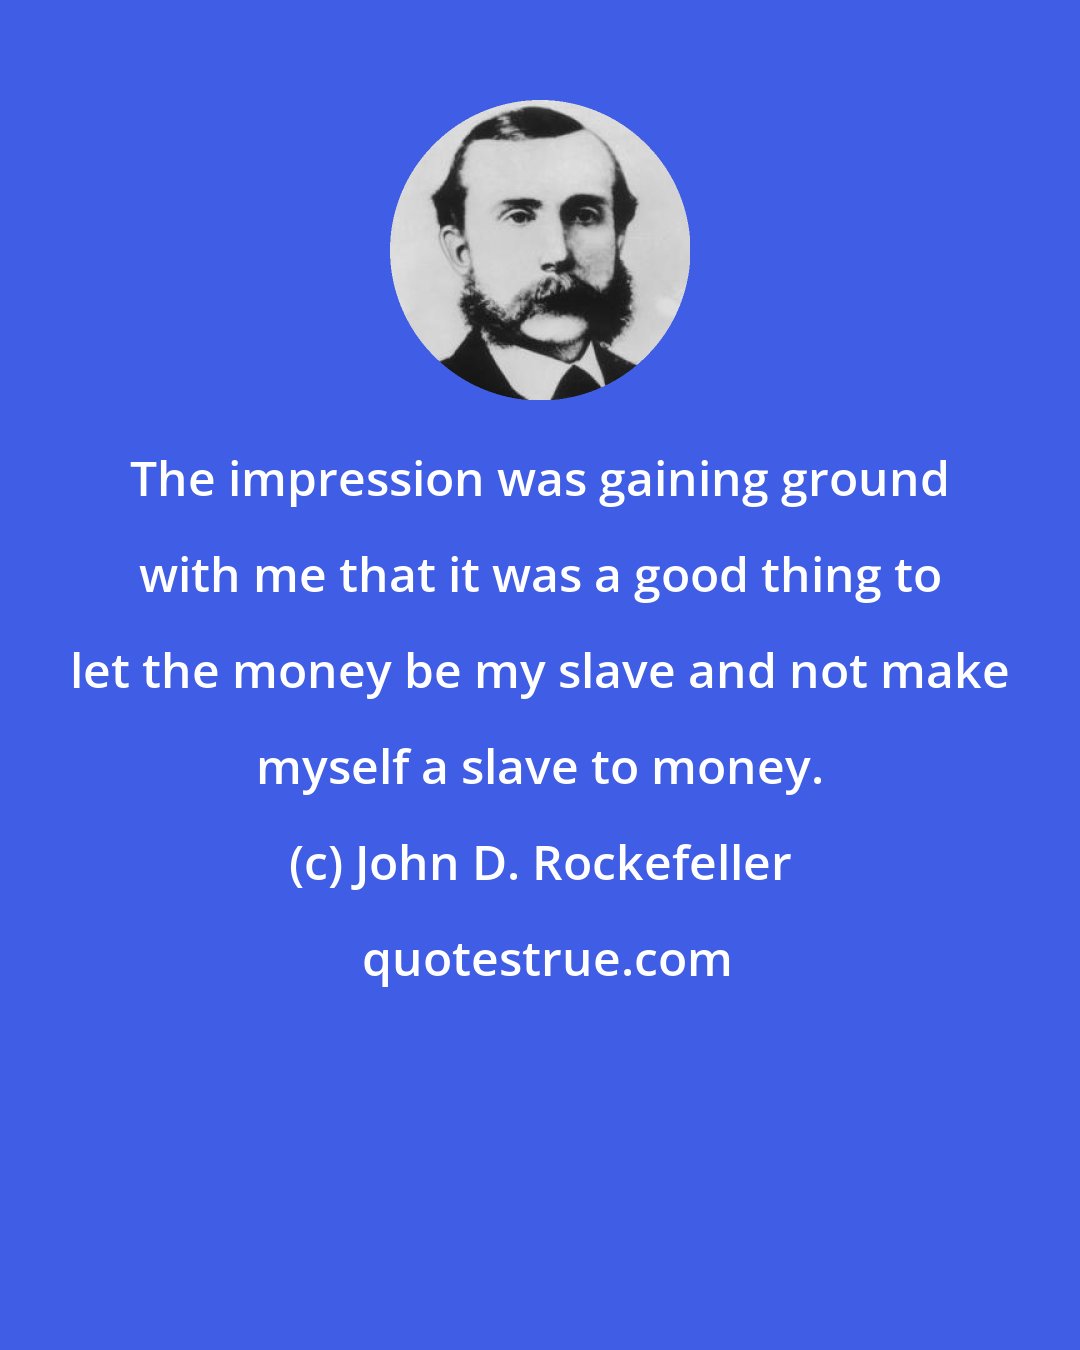 John D. Rockefeller: The impression was gaining ground with me that it was a good thing to let the money be my slave and not make myself a slave to money.